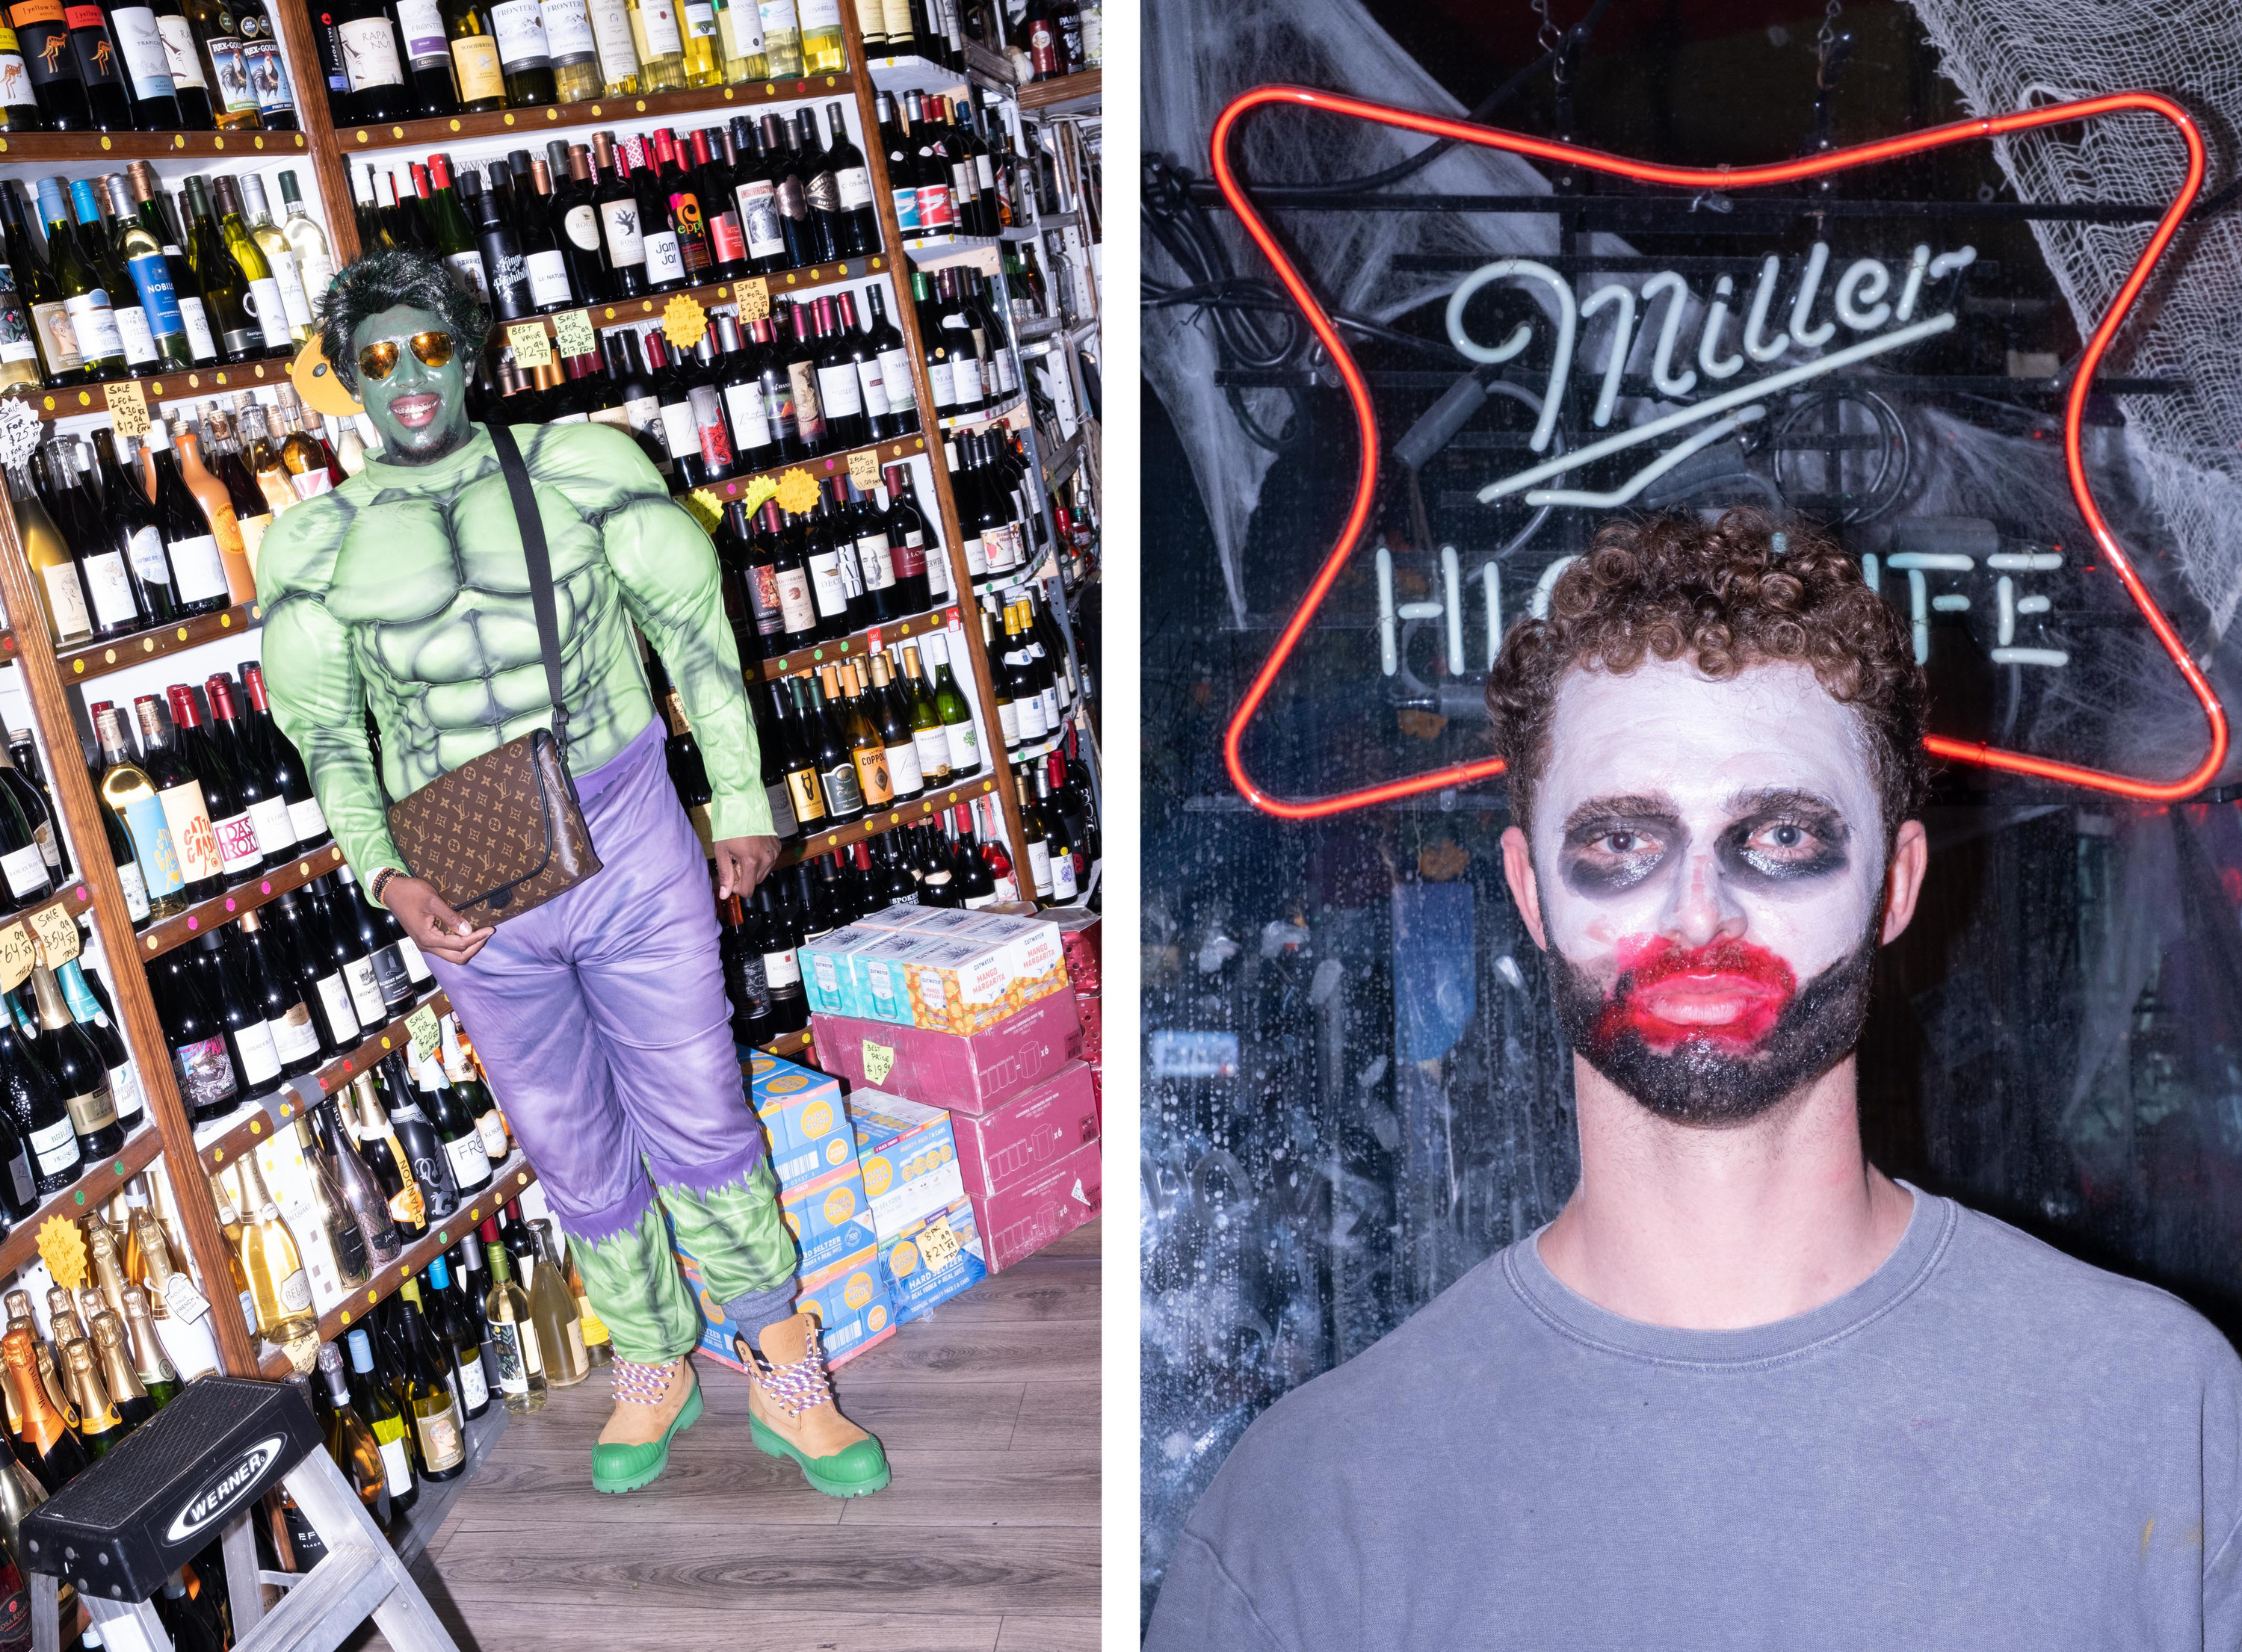 Left, the hulk in a liquor store, right, a man with bad makeup in front of a miller high life sign 